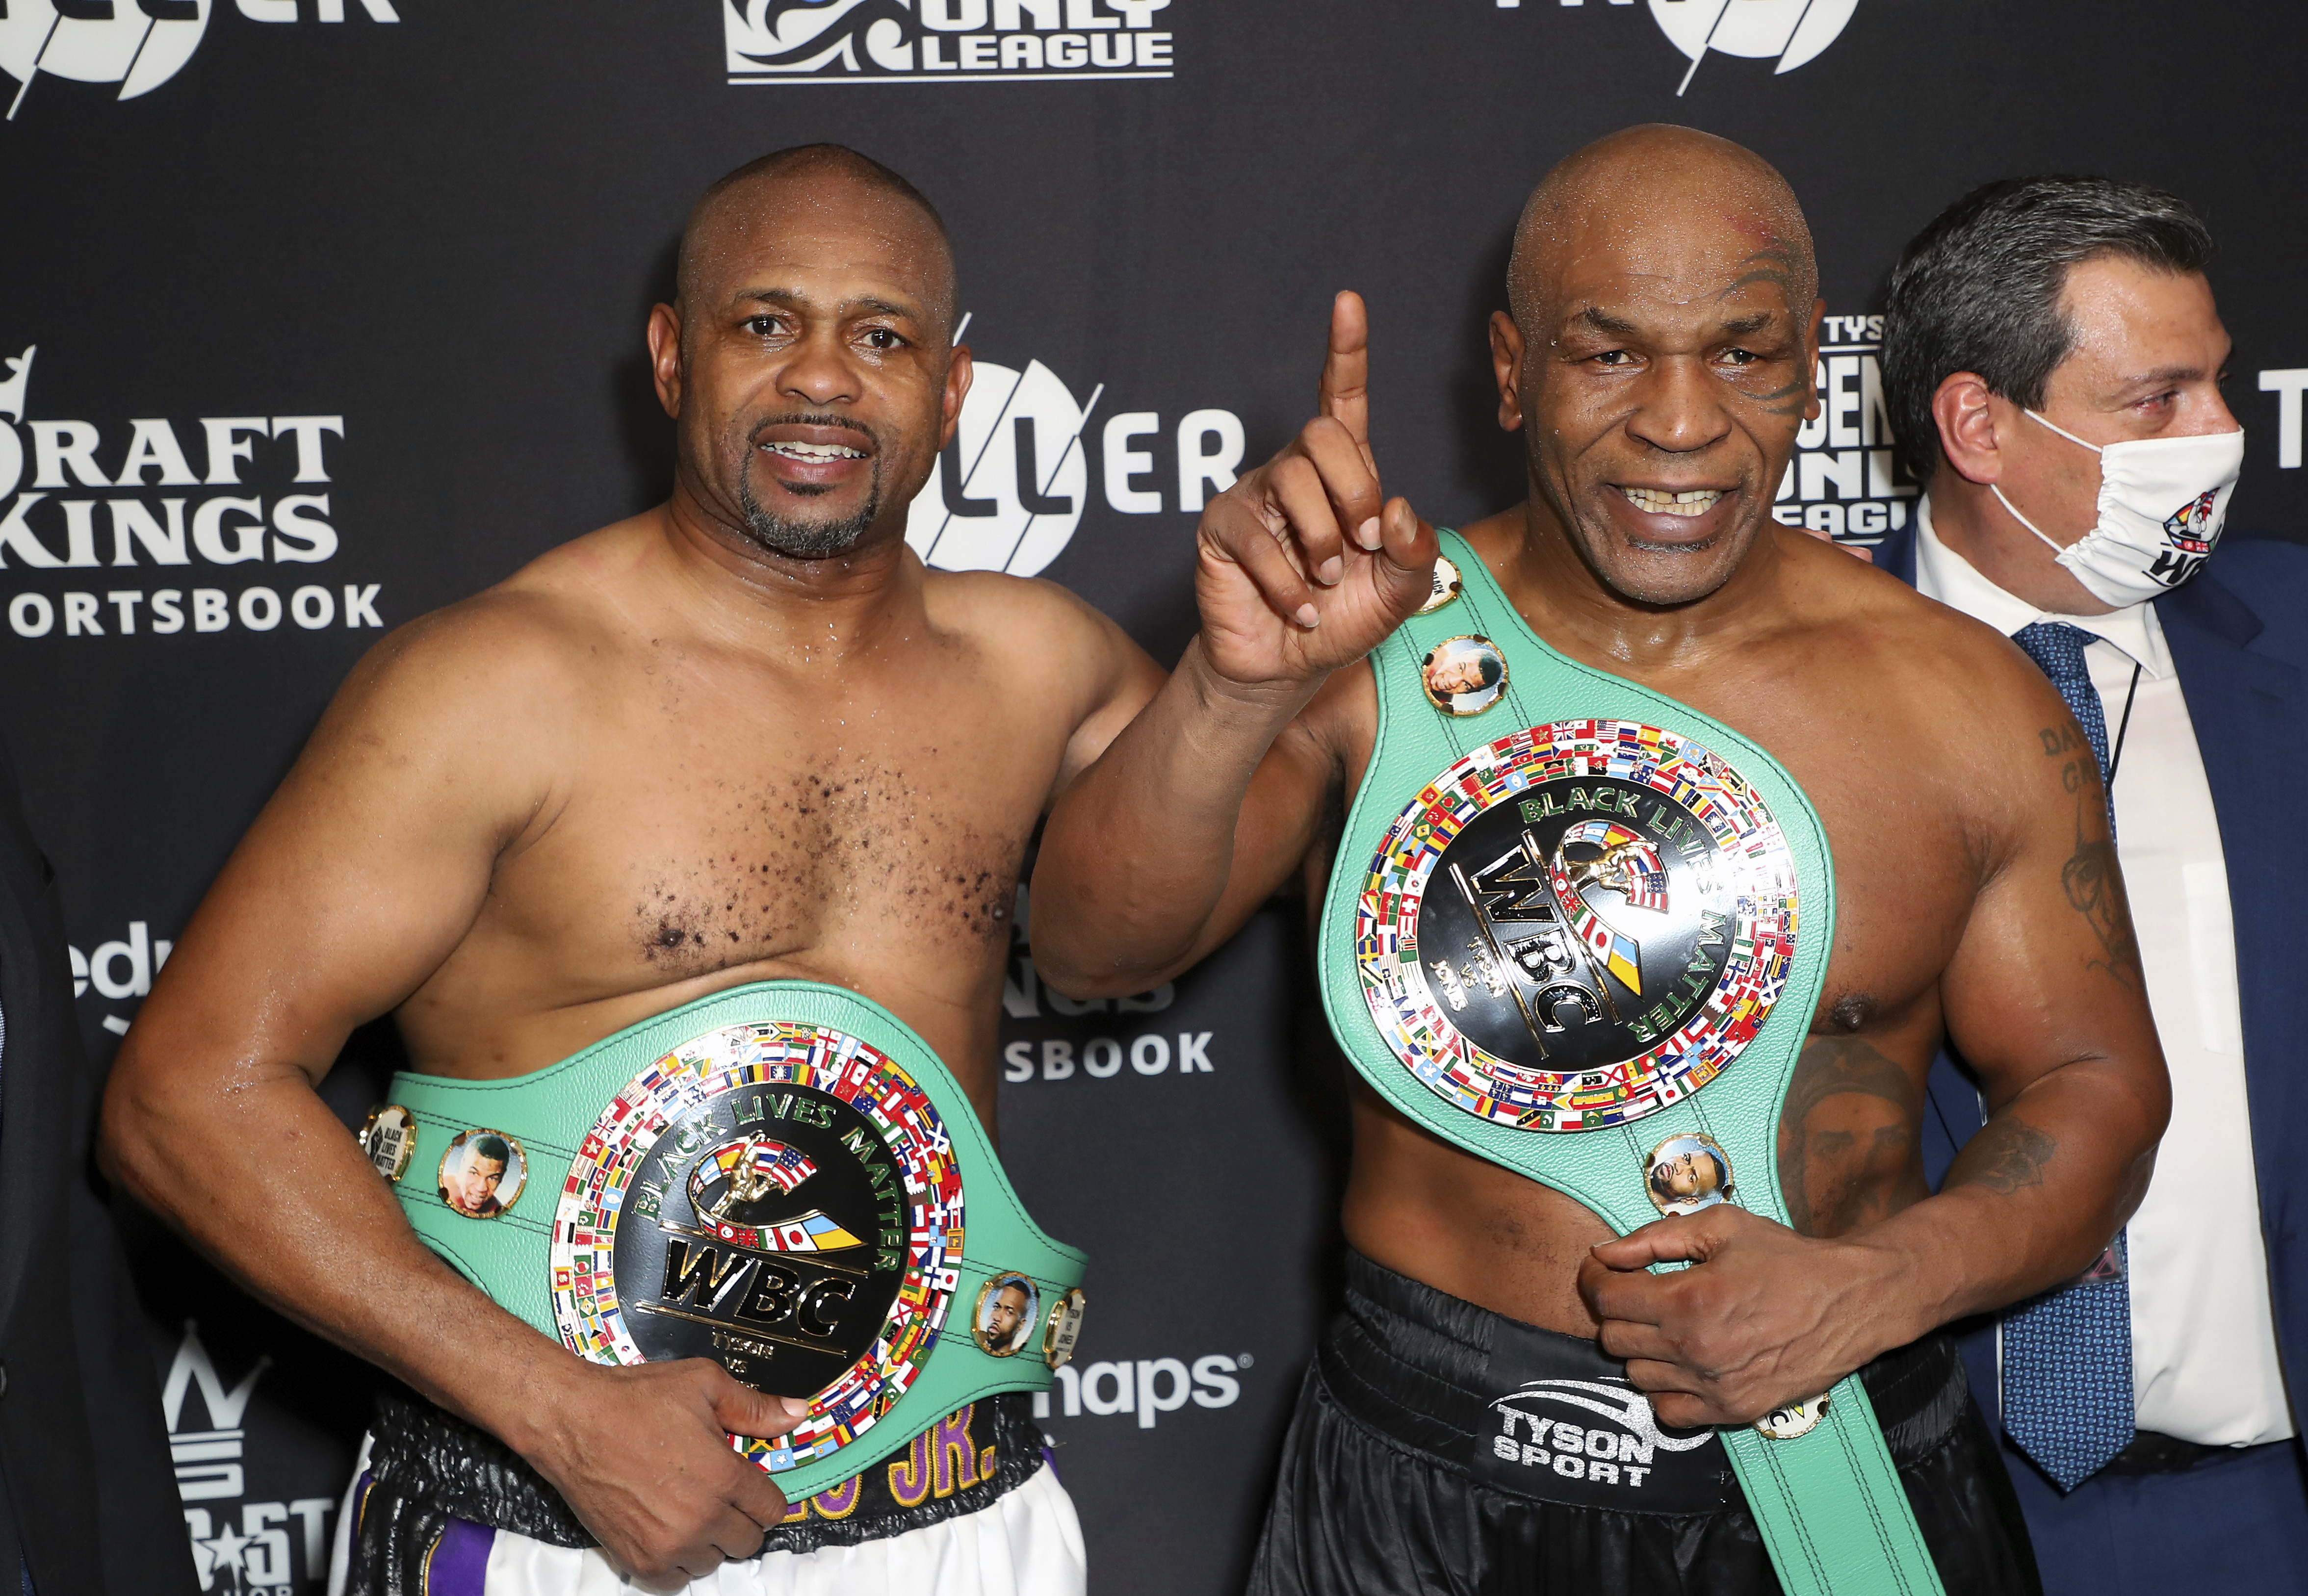 A pay-per-view boxing exhibition headlined by Roy Jones Jr. and Mike Tyson pulled in more than $80 million in revenue.